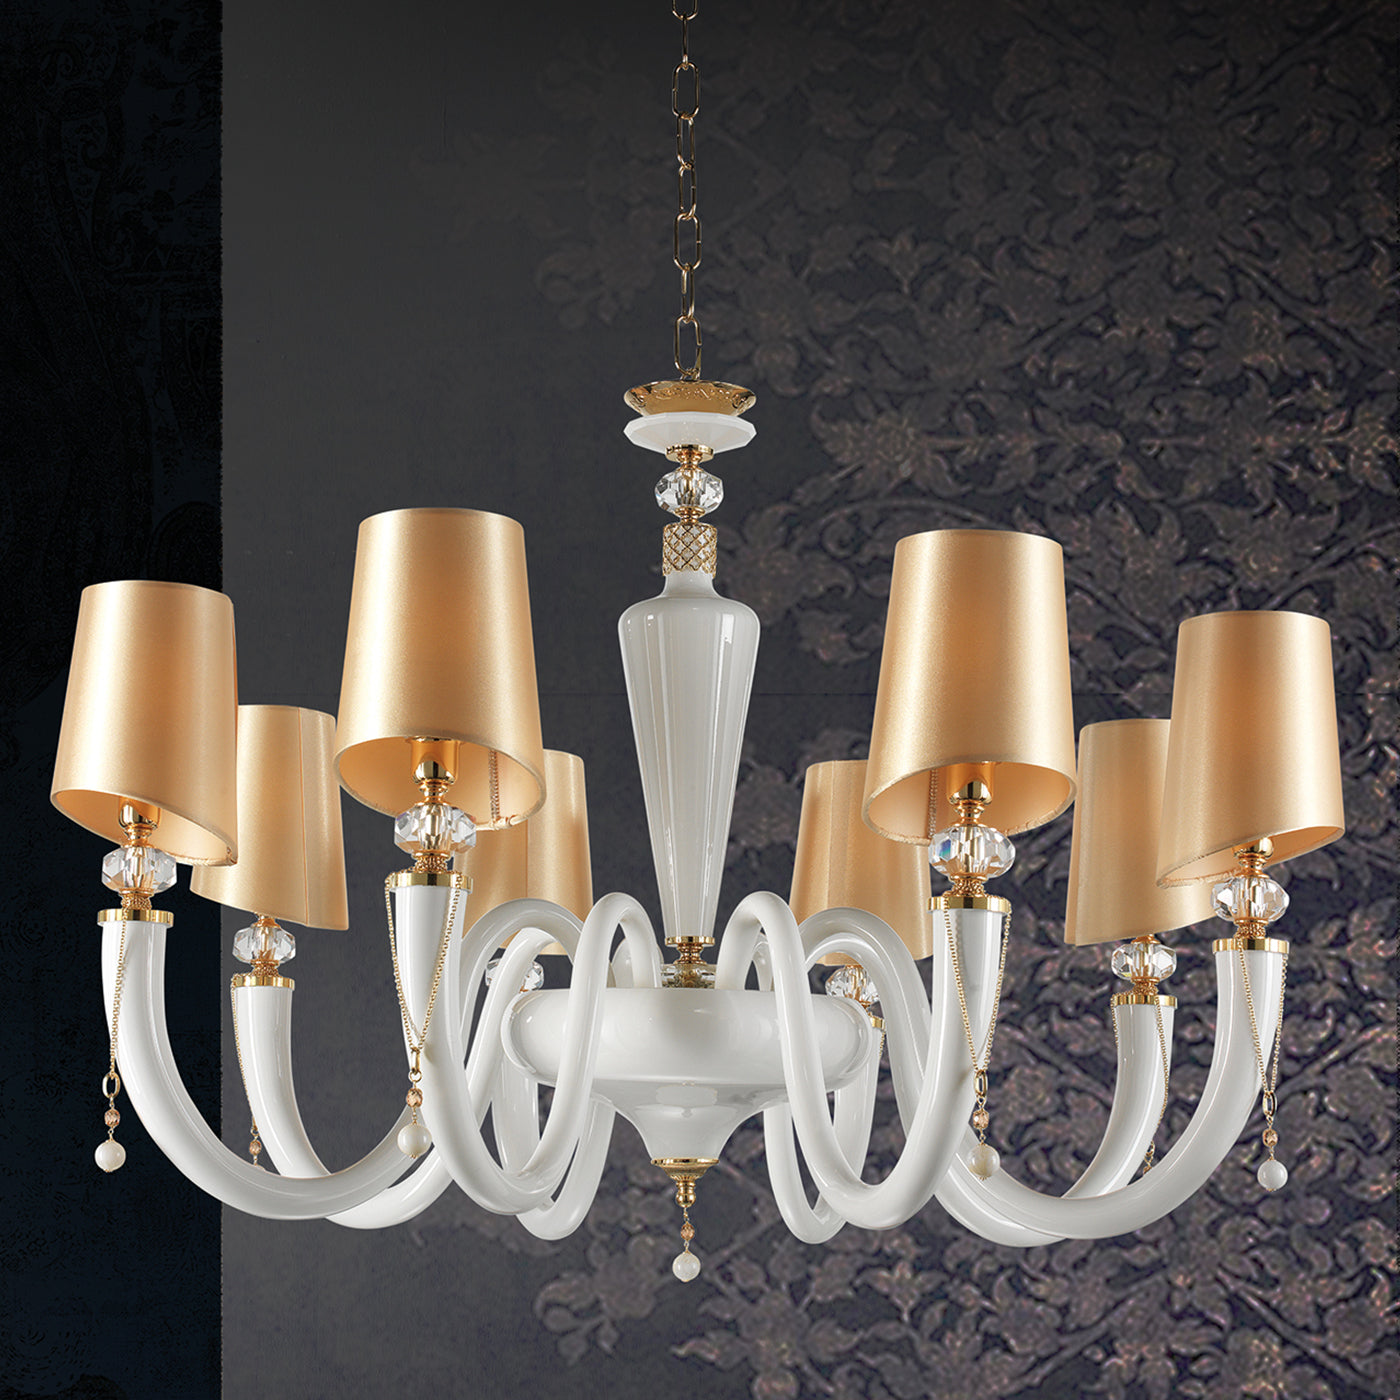 David 8-Light White and Gold Chandelier - Alternative view 1